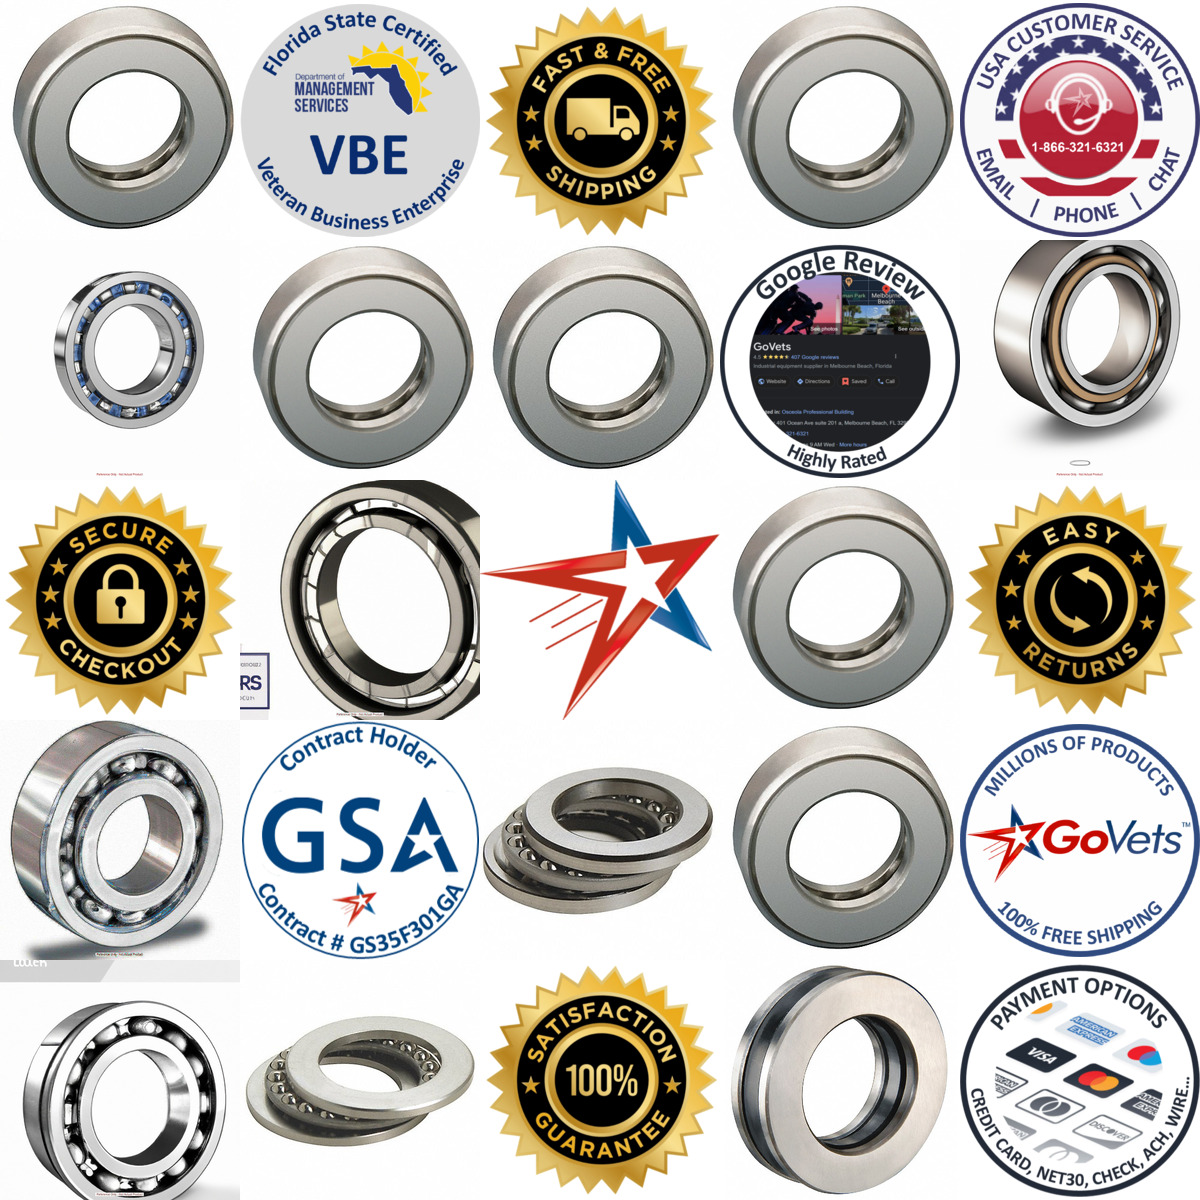 A selection of Ball Thrust Bearings products on GoVets